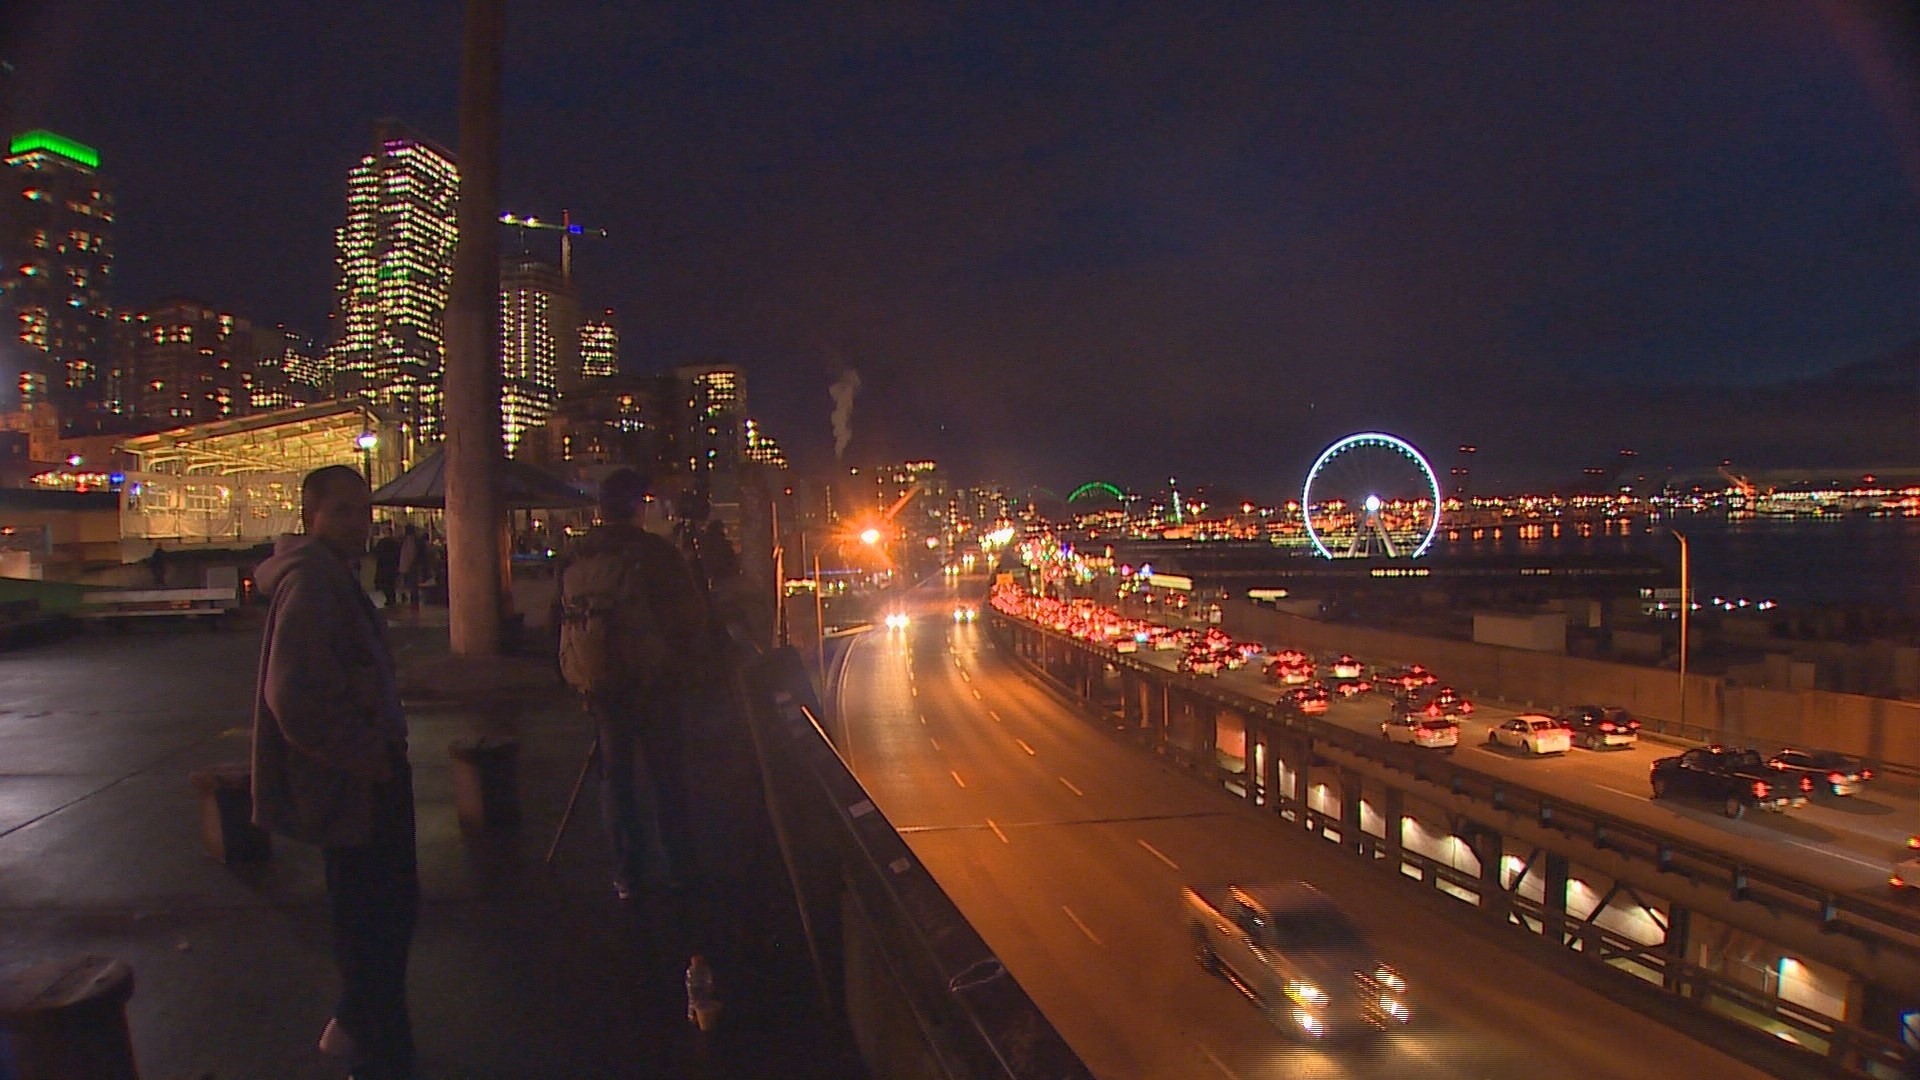 With the closure of the Alaskan Way Viaduct just 24 hours away, people are saying goodbye to the Seattle landmark in their own ways. KING 5's Michael Crowe reports